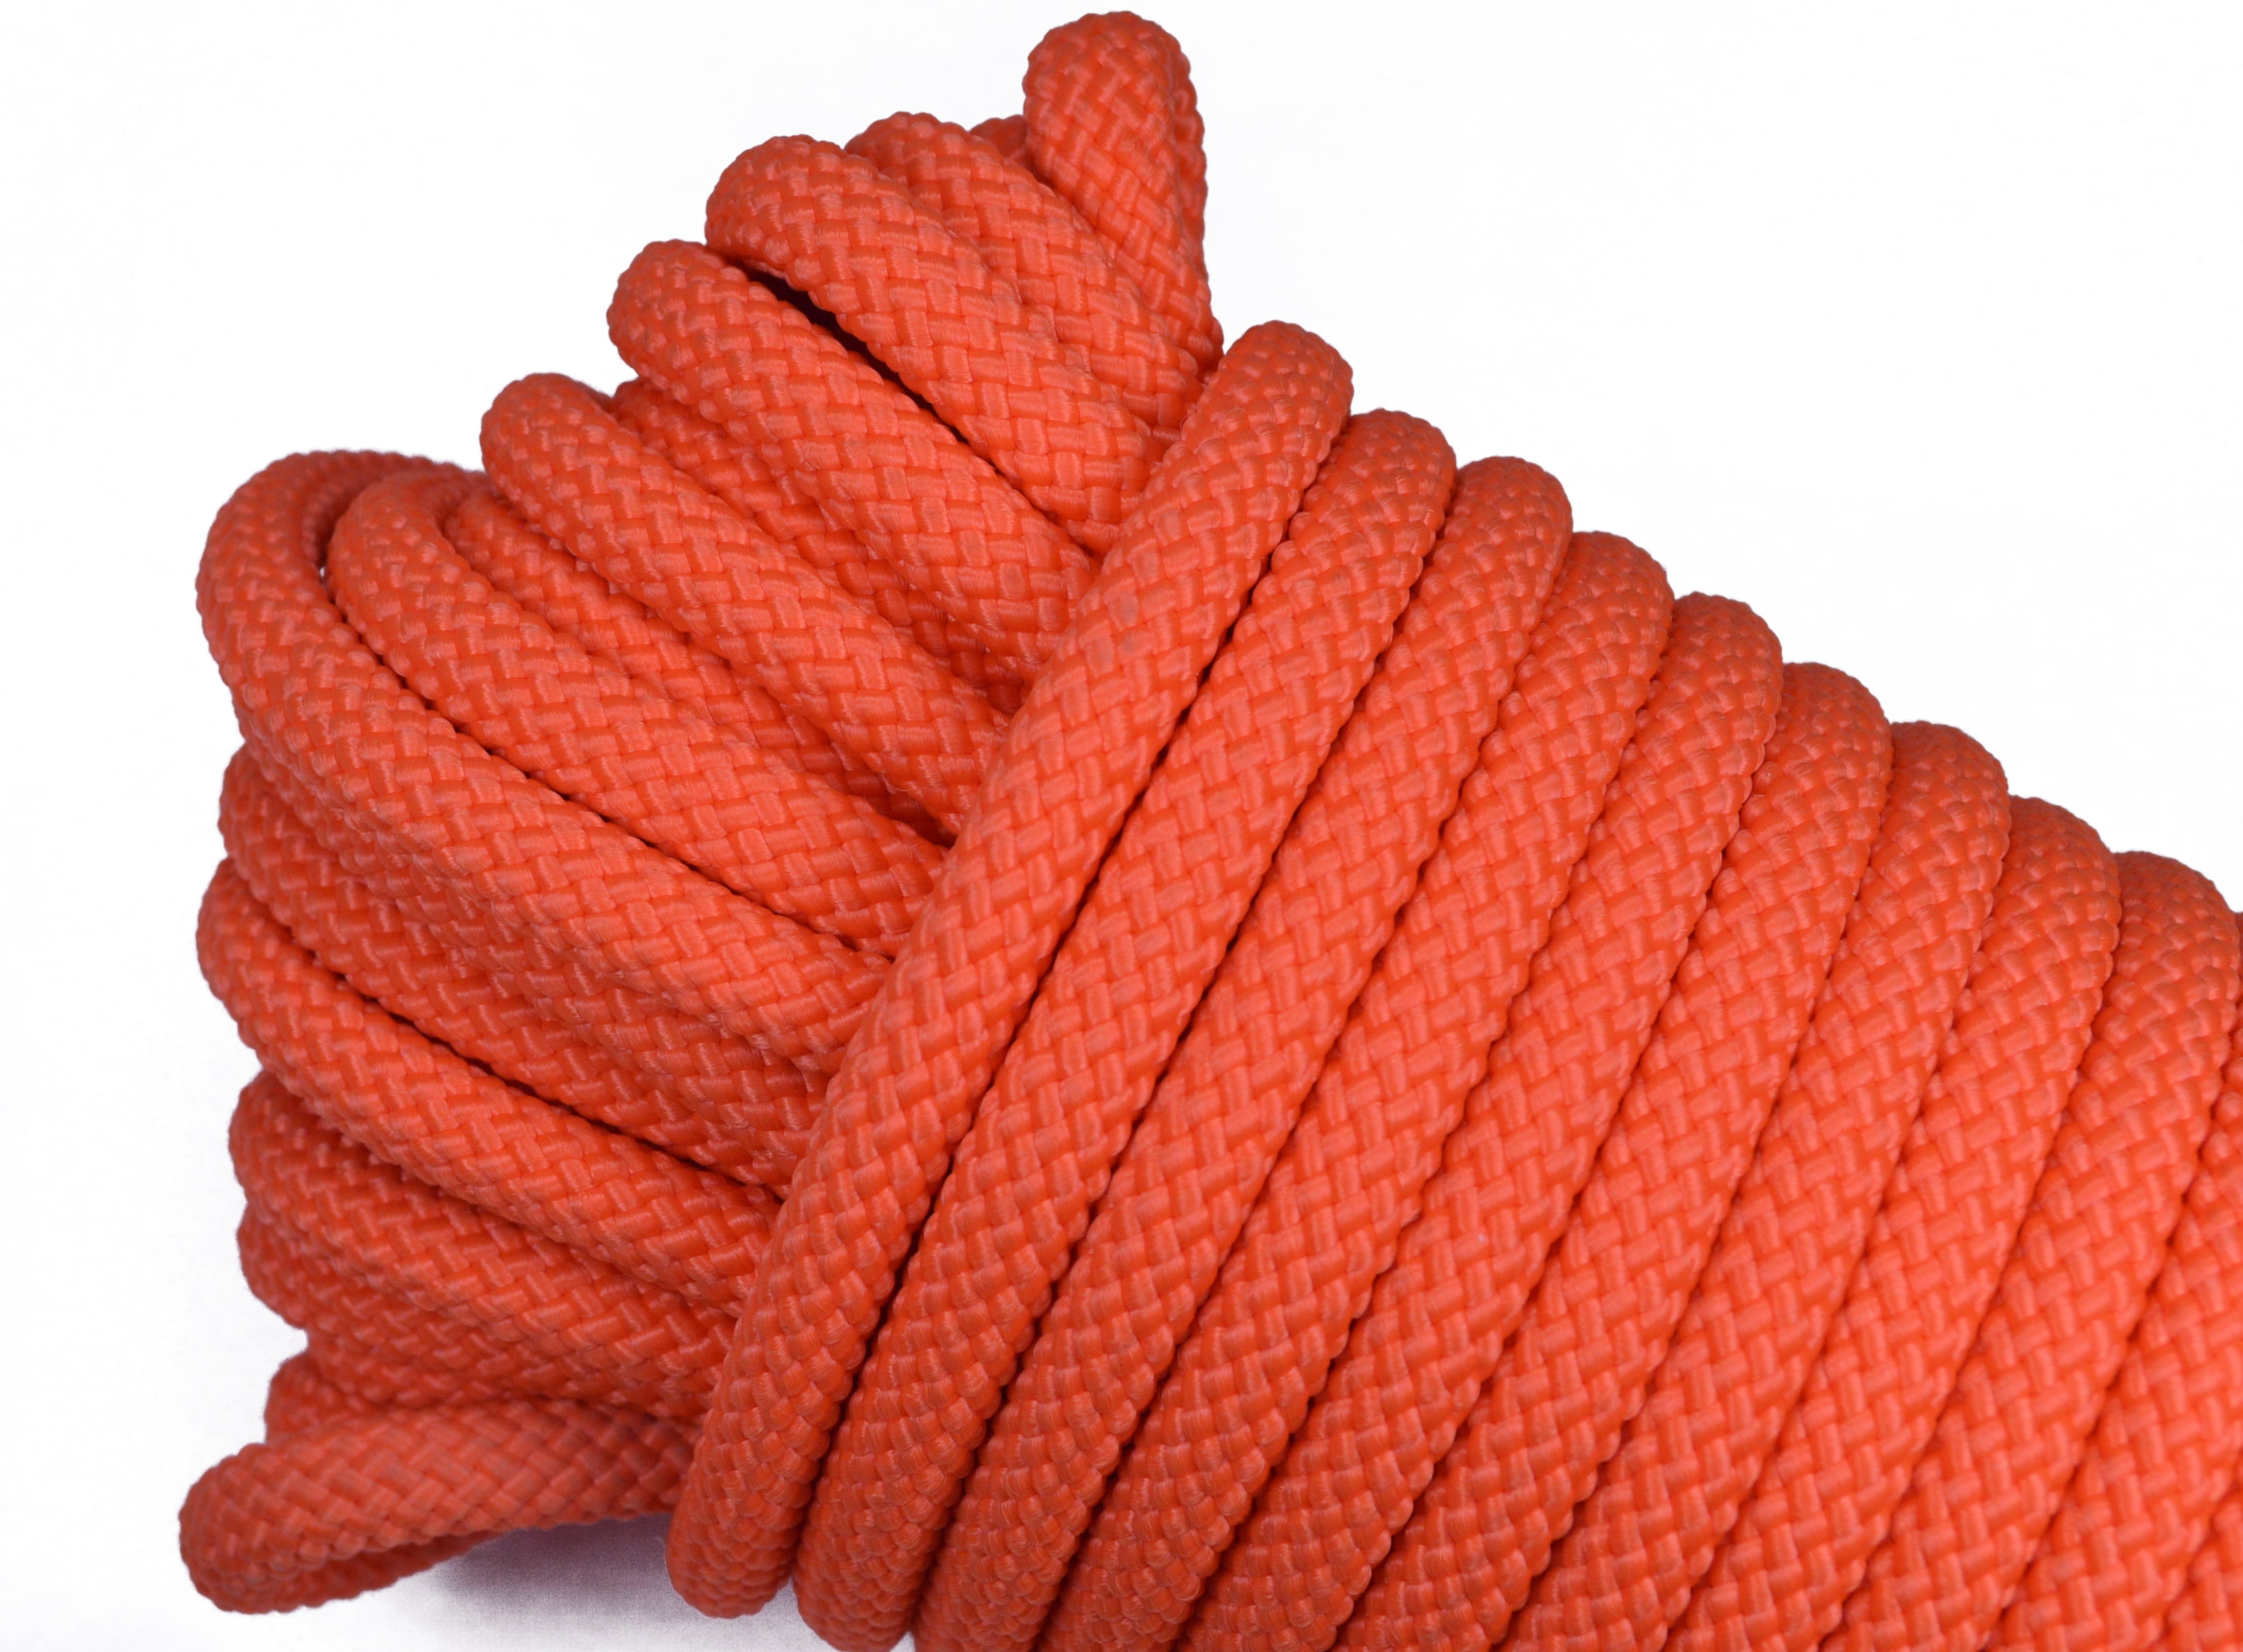 Details about   1/4" x 200 ft hank of Hollow Braid Polypropylene Rope Hank Made in USA. 